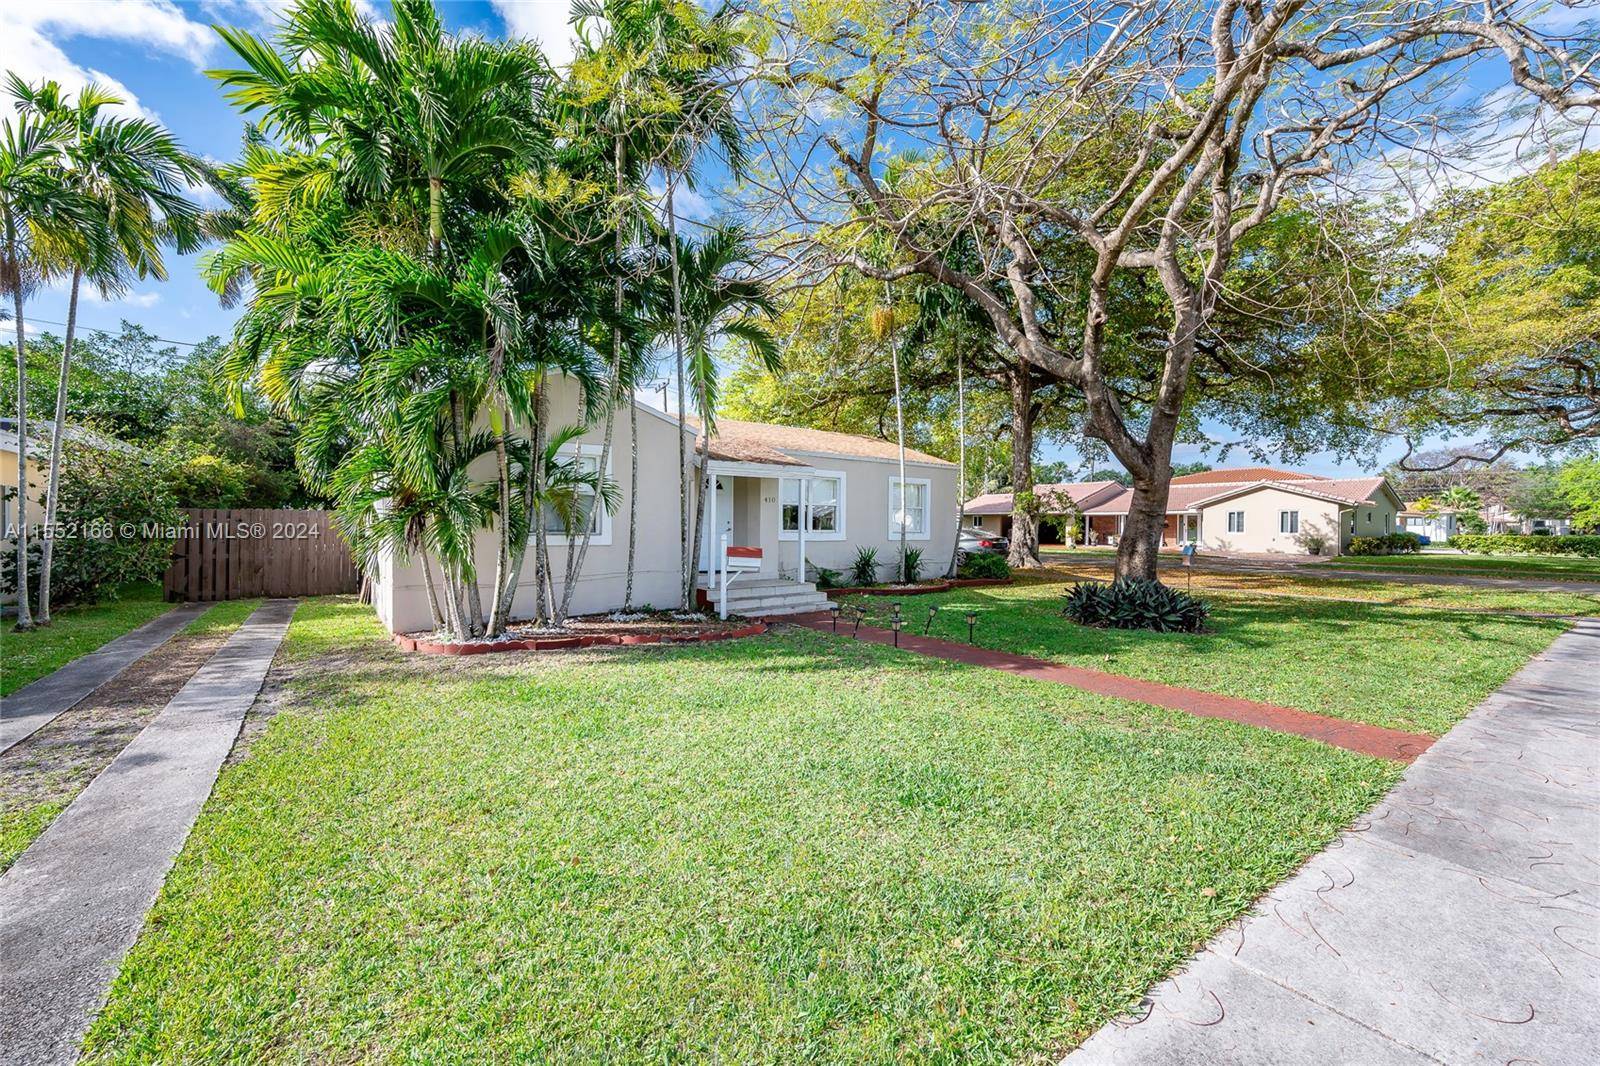 Mediterranean home located 2 blocks to Miami Springs Golf course and minutes to downtown Miami Springs w Shopping and Dining options.